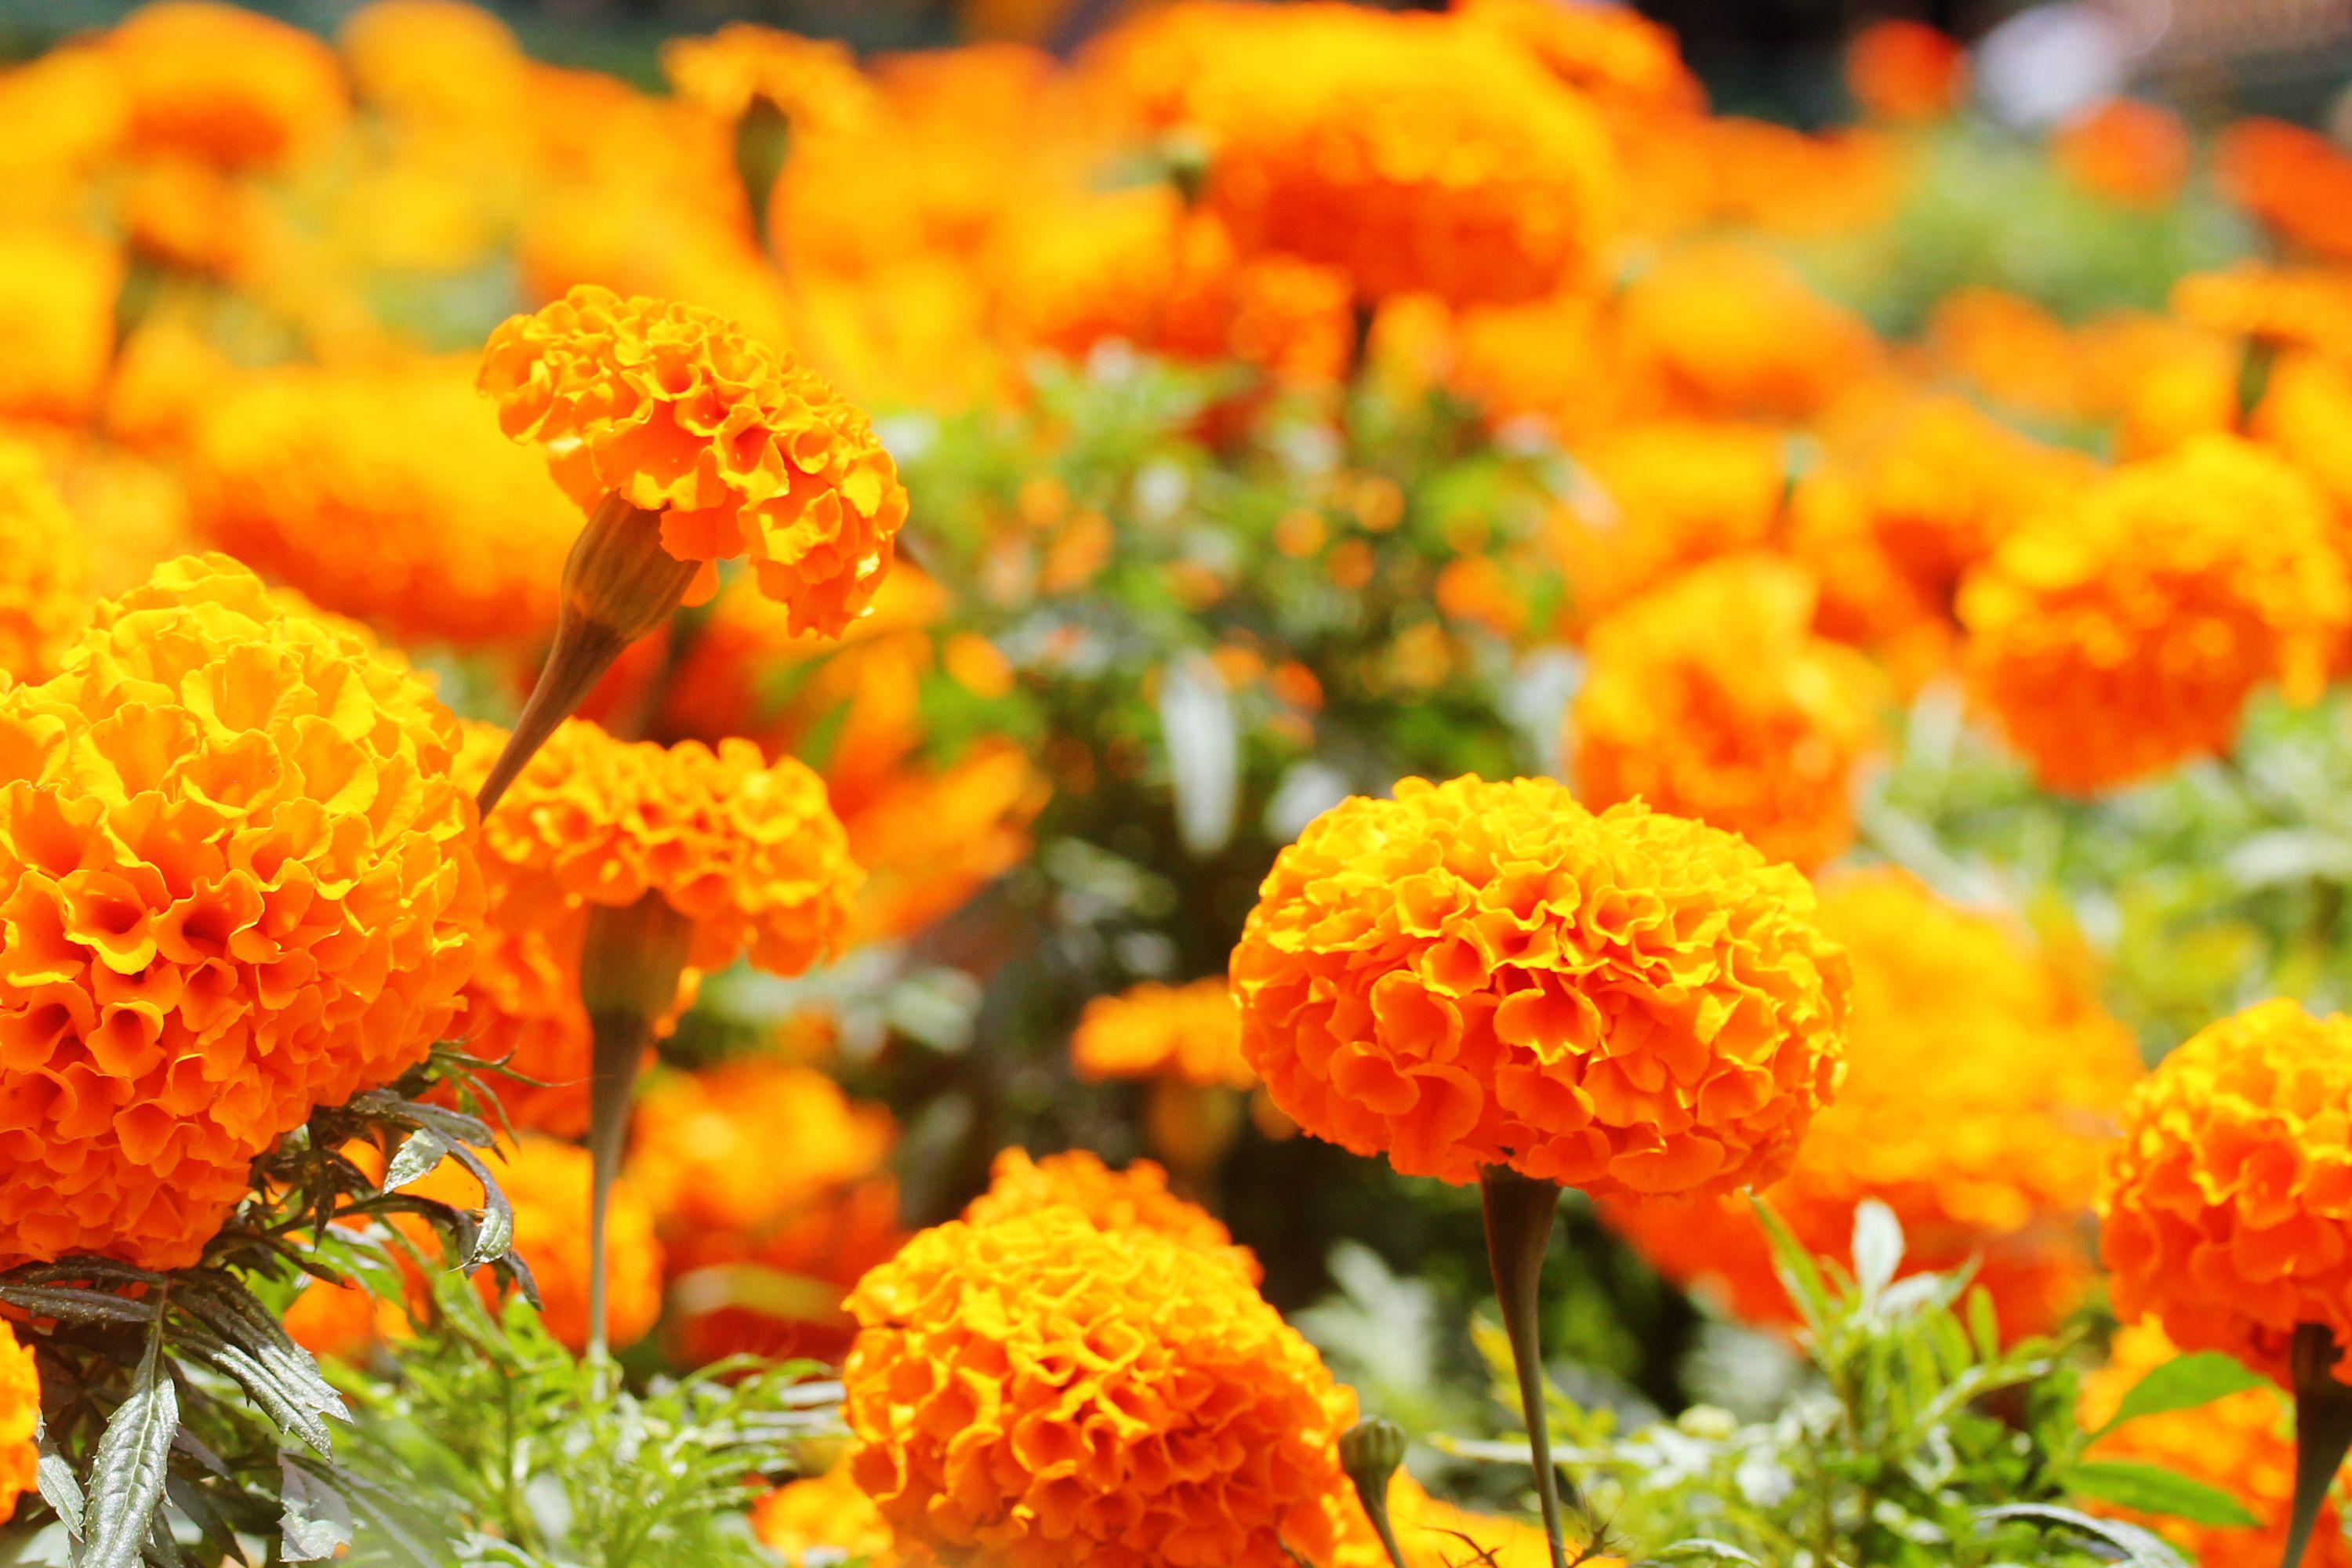 marigold flowers image and wallpaper Download